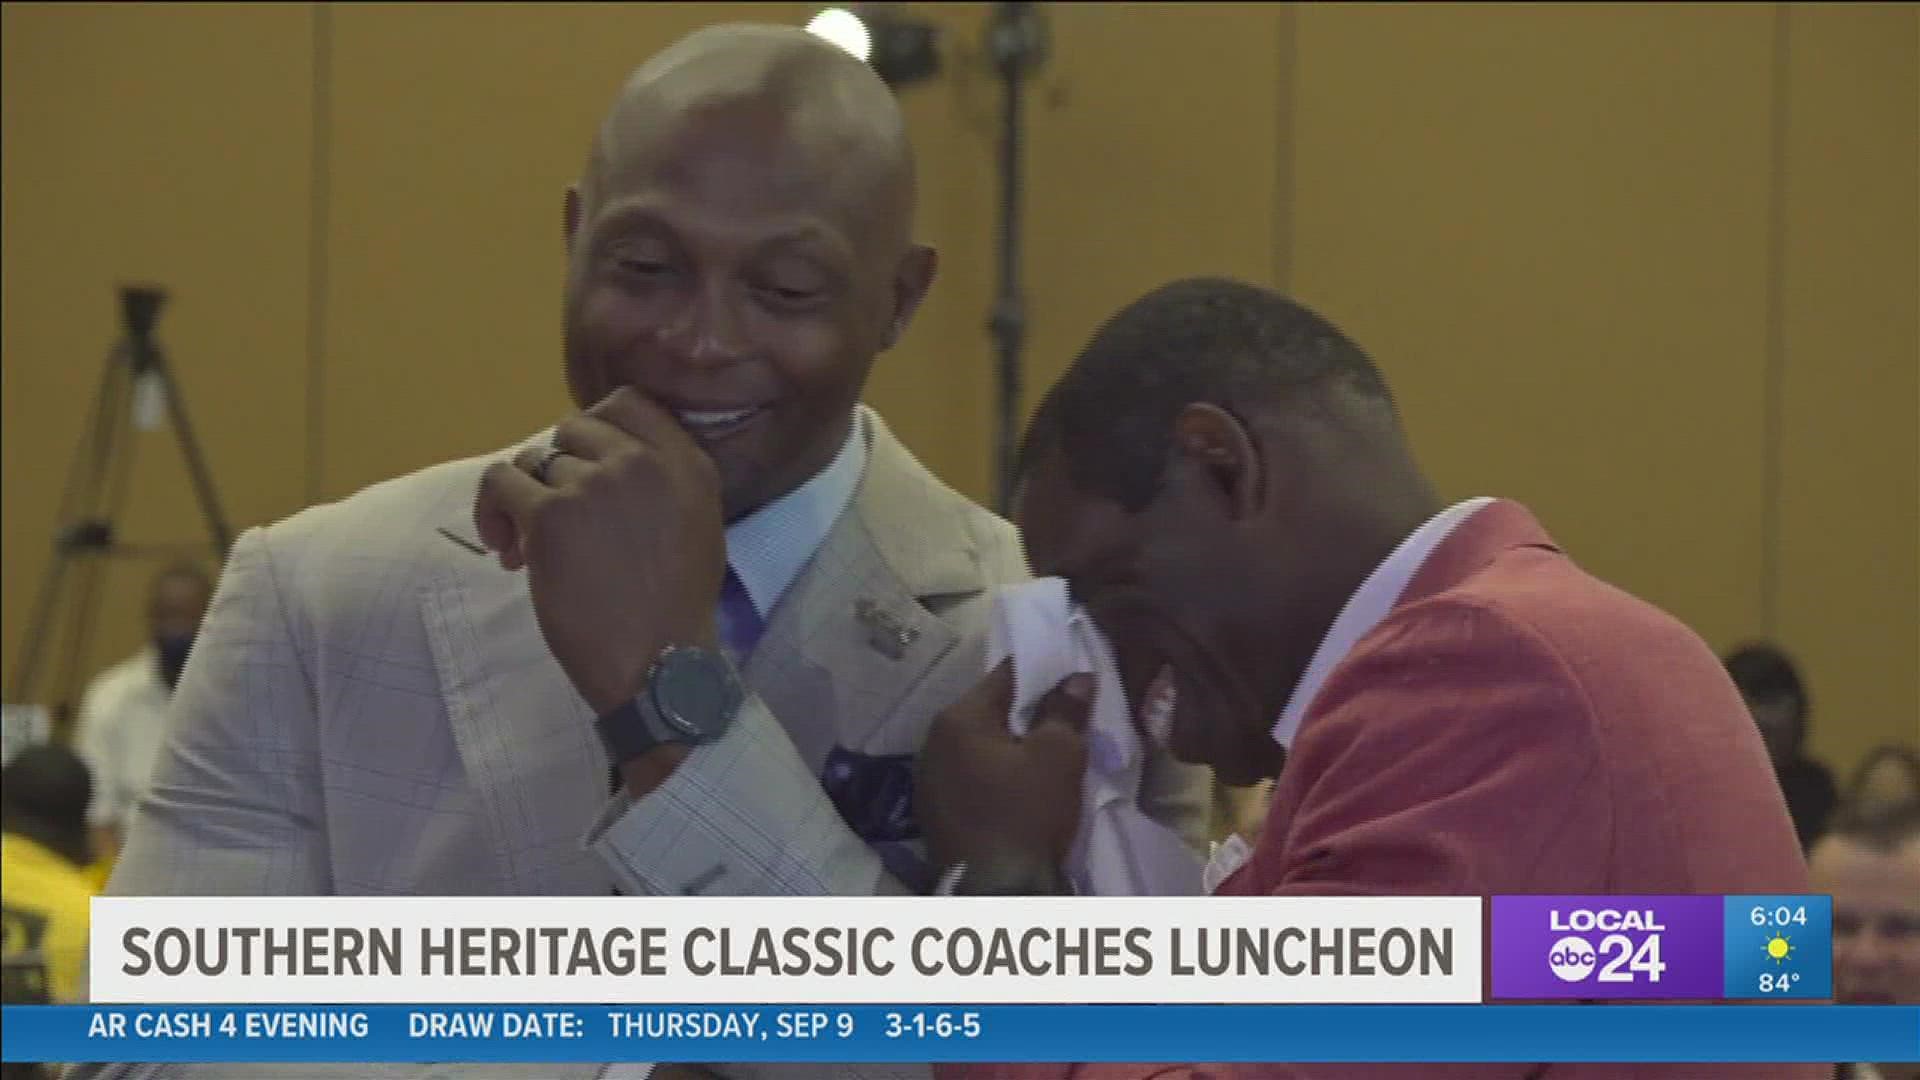 The head coaches for the Southern Heritage Classic are both former NFL greats.